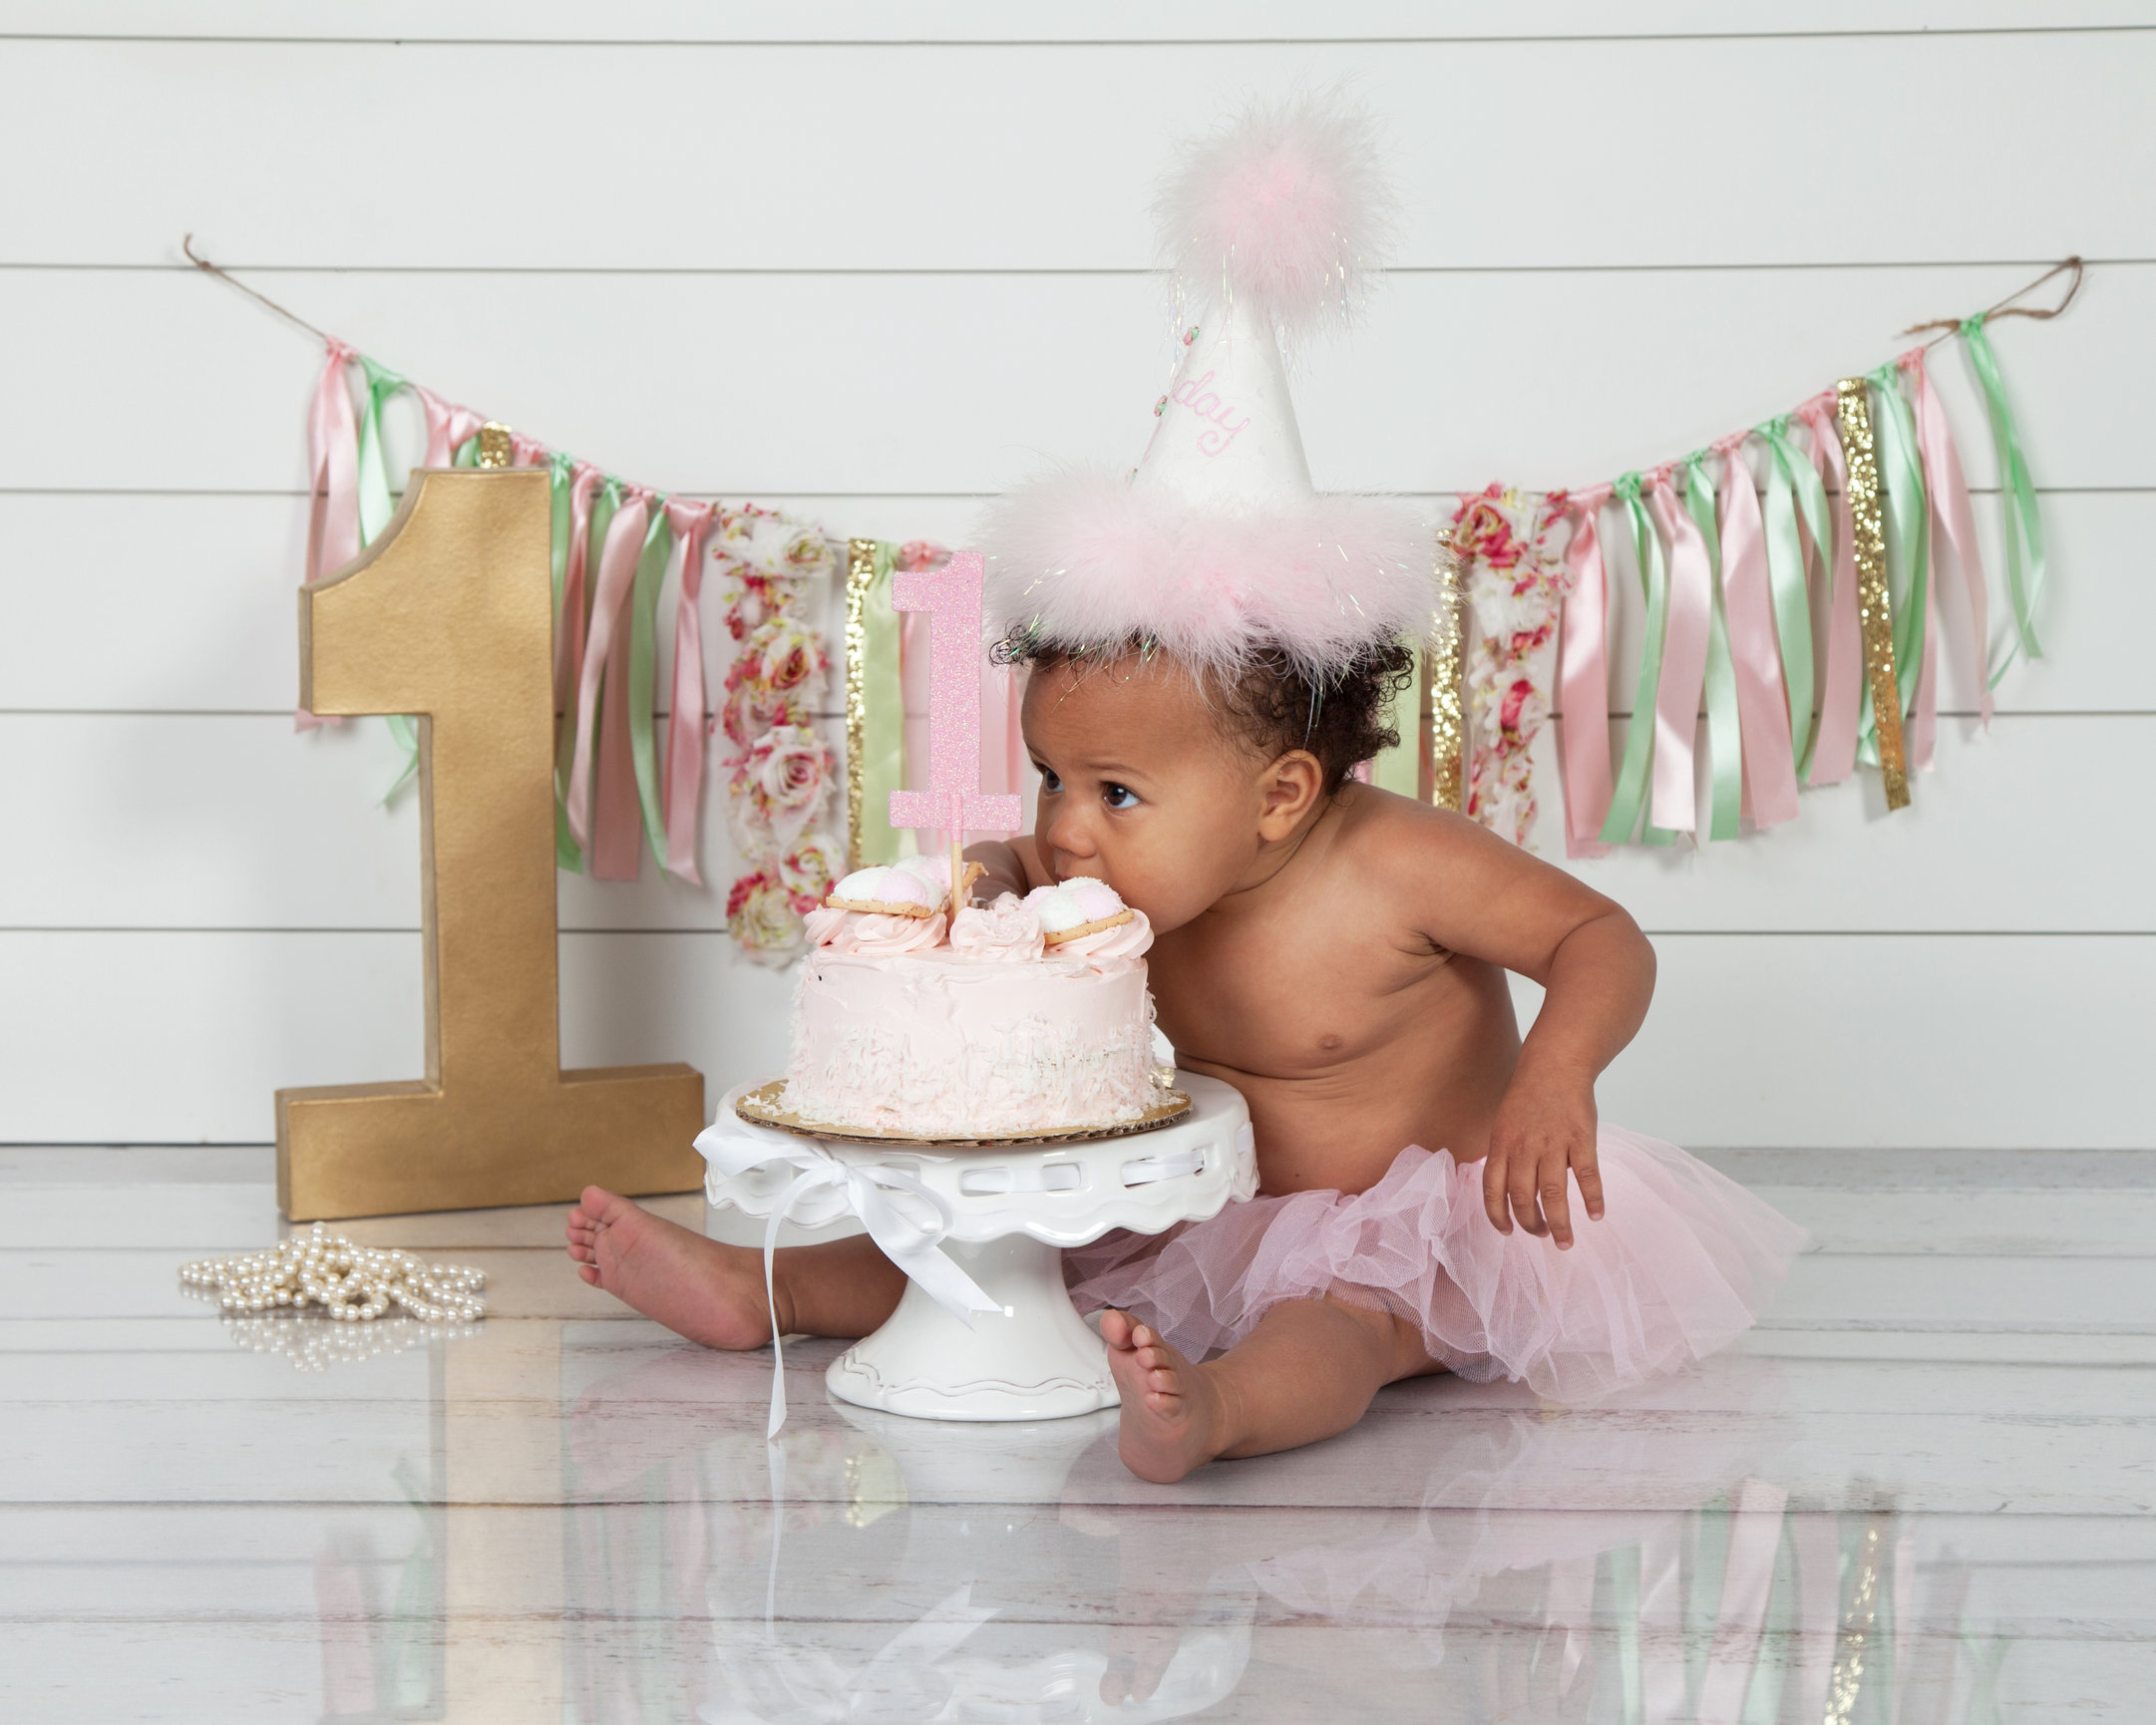 Oh, baby (cakes)! See the 'smash' trend taking 1-year-old parties by storm